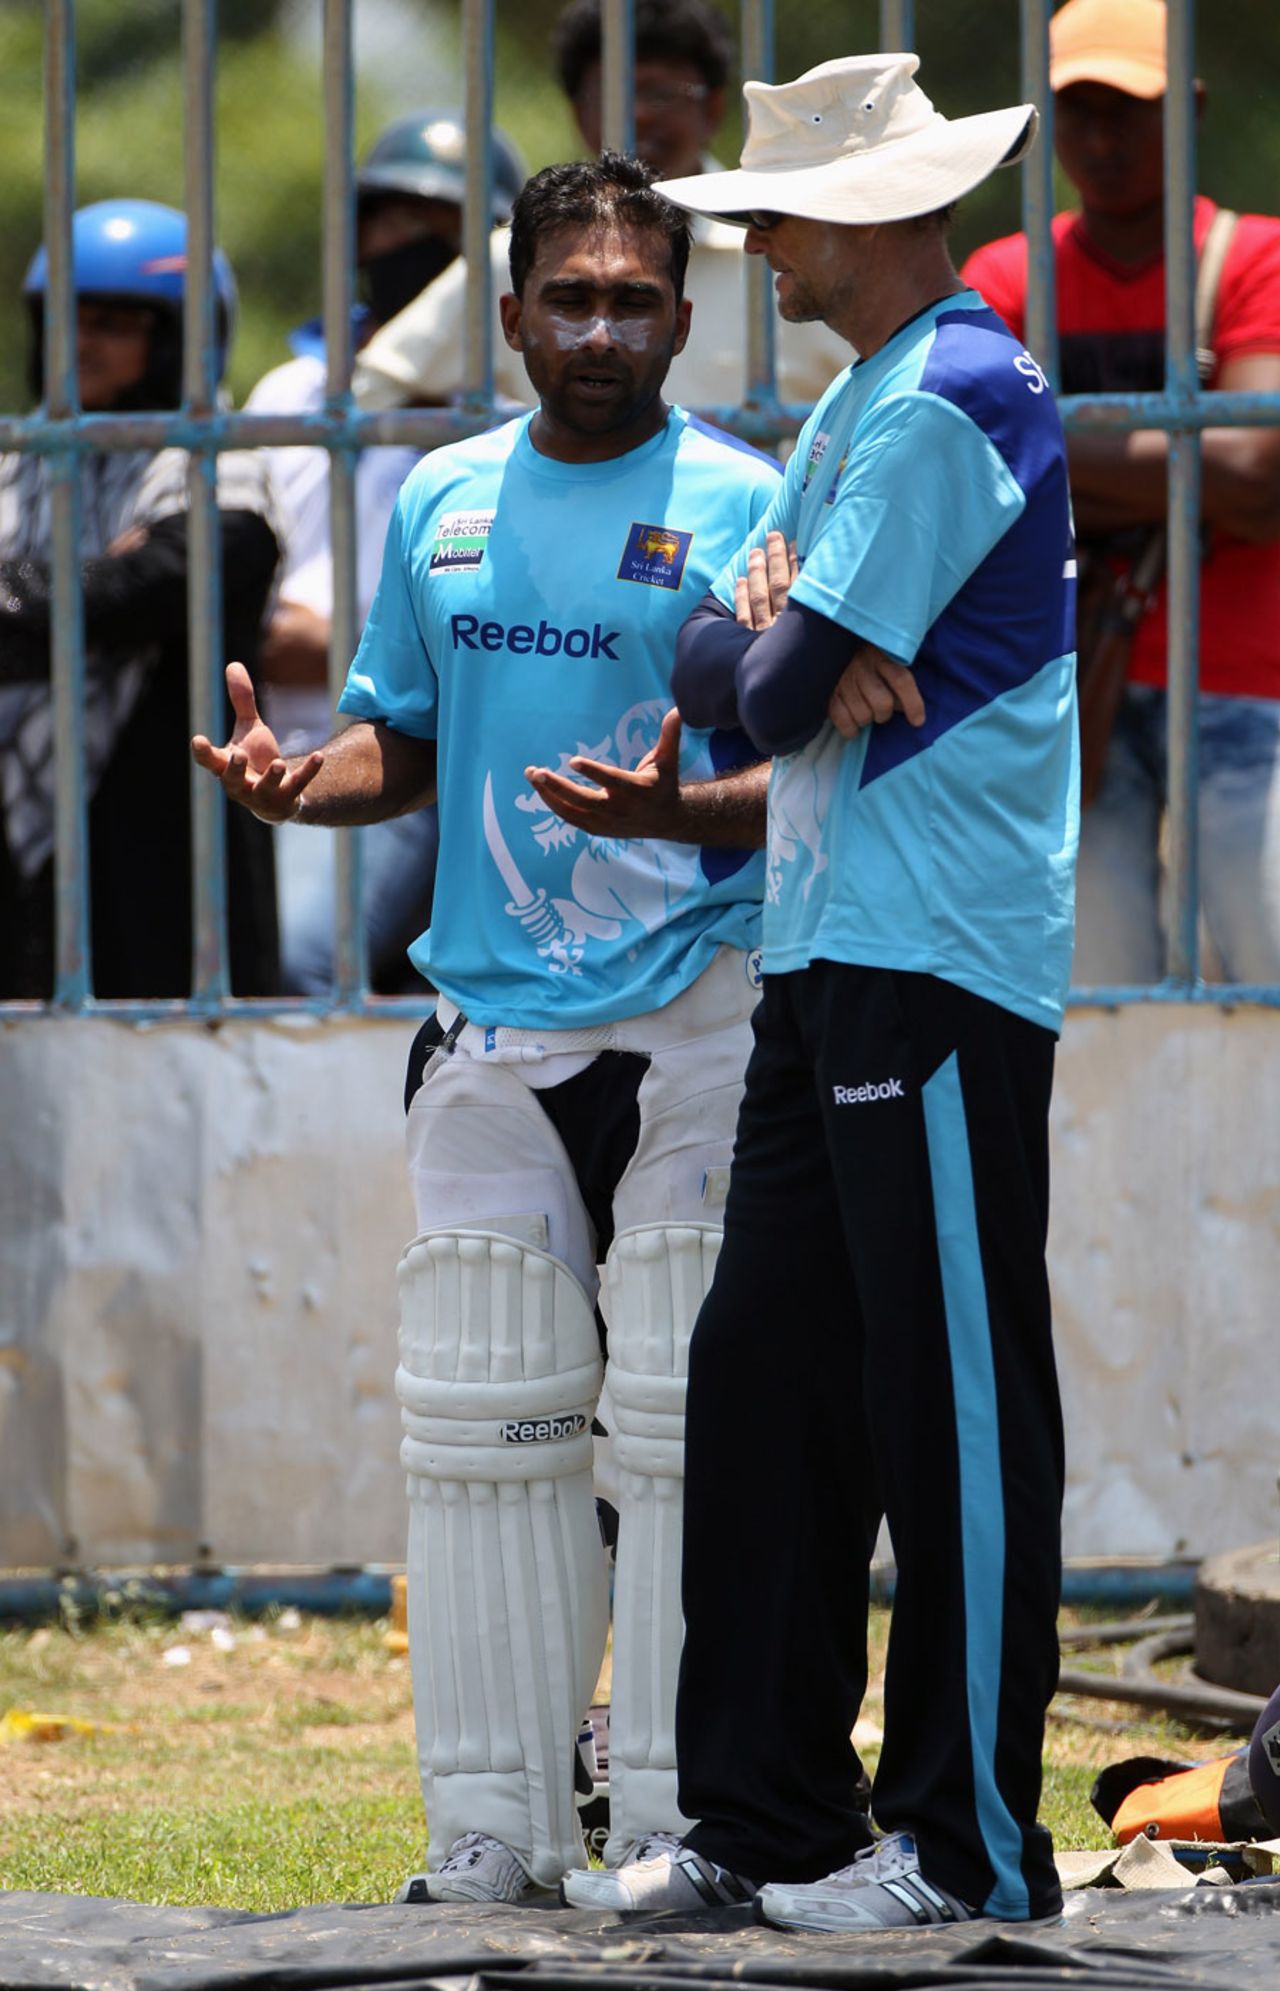 Sri Lanka's captain and coach, Mahela Jayawardene and Graham Ford, have a chat, Galle, March 25, 2012